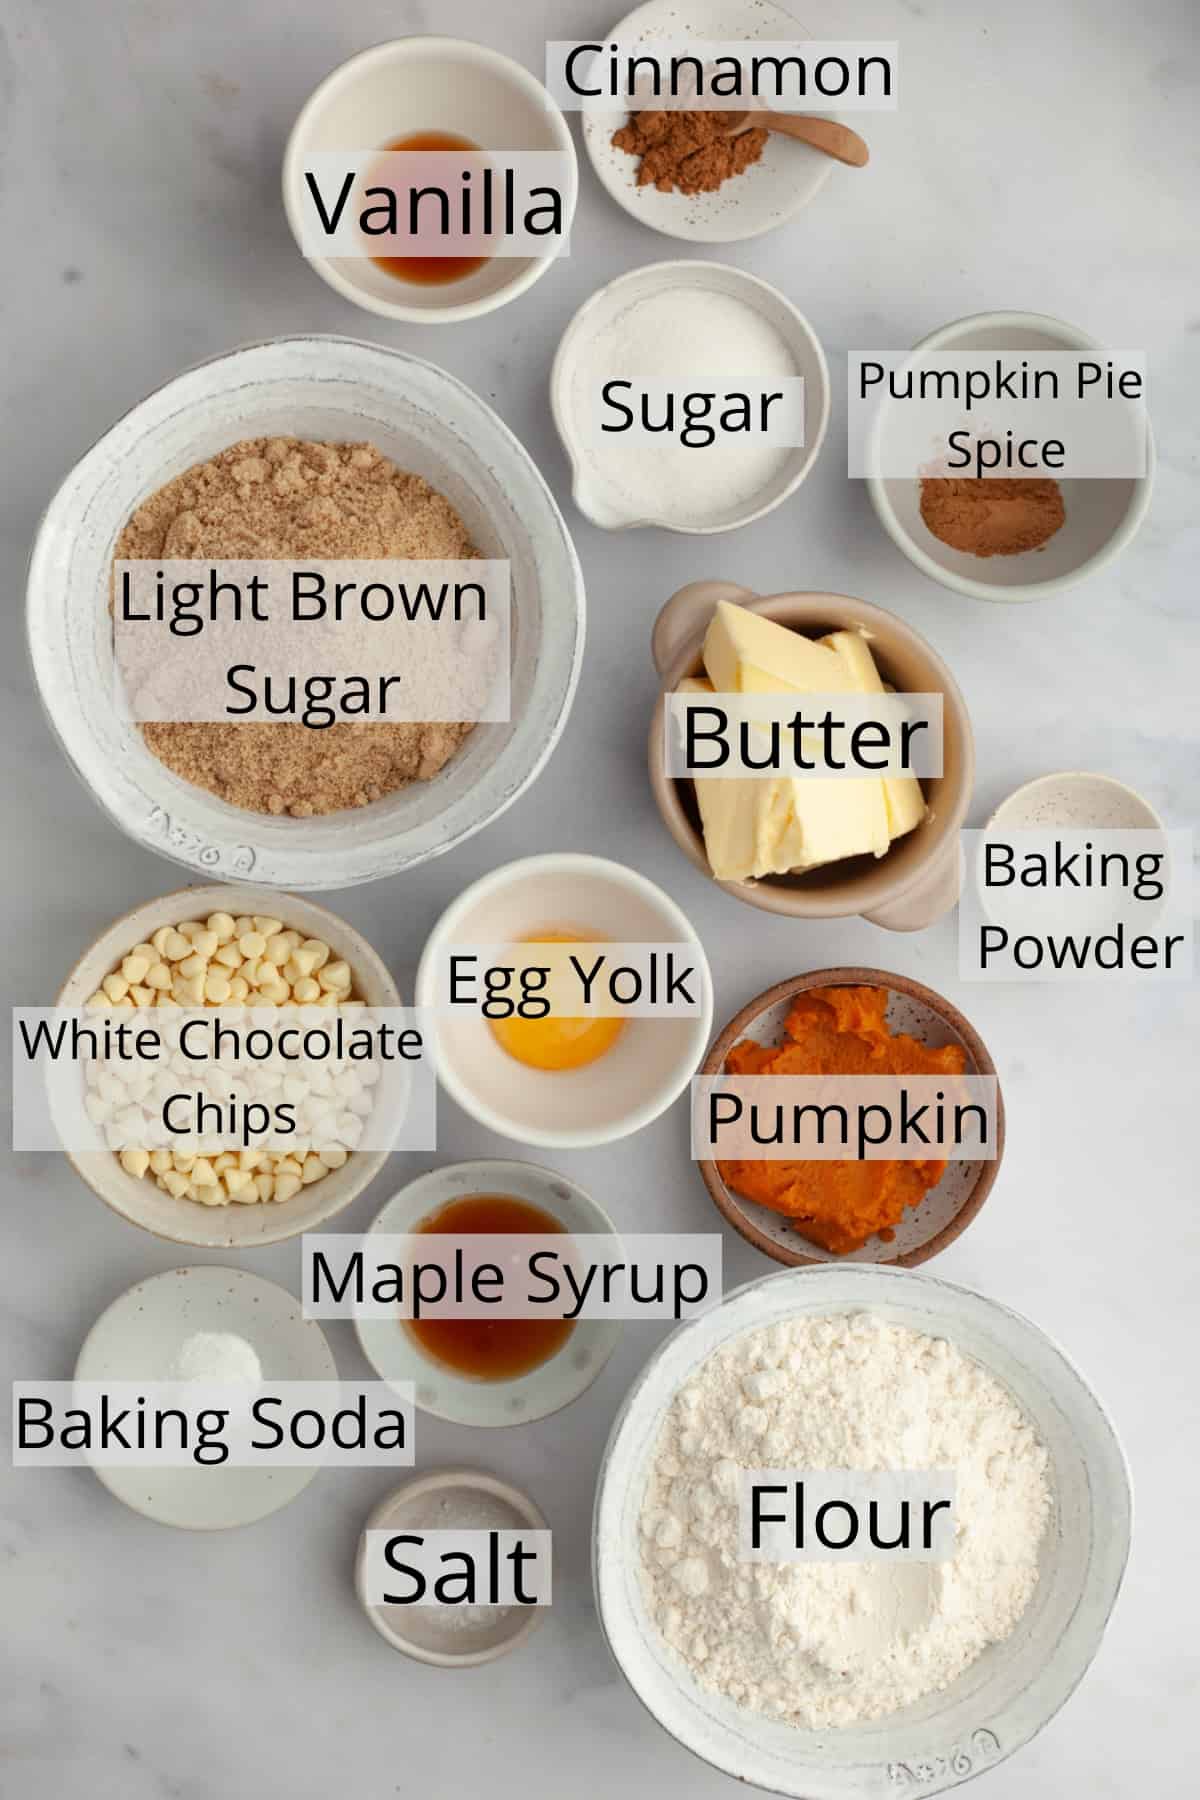 All the ingredients needed to make pumpkin cookies, weighed out into small bowls.